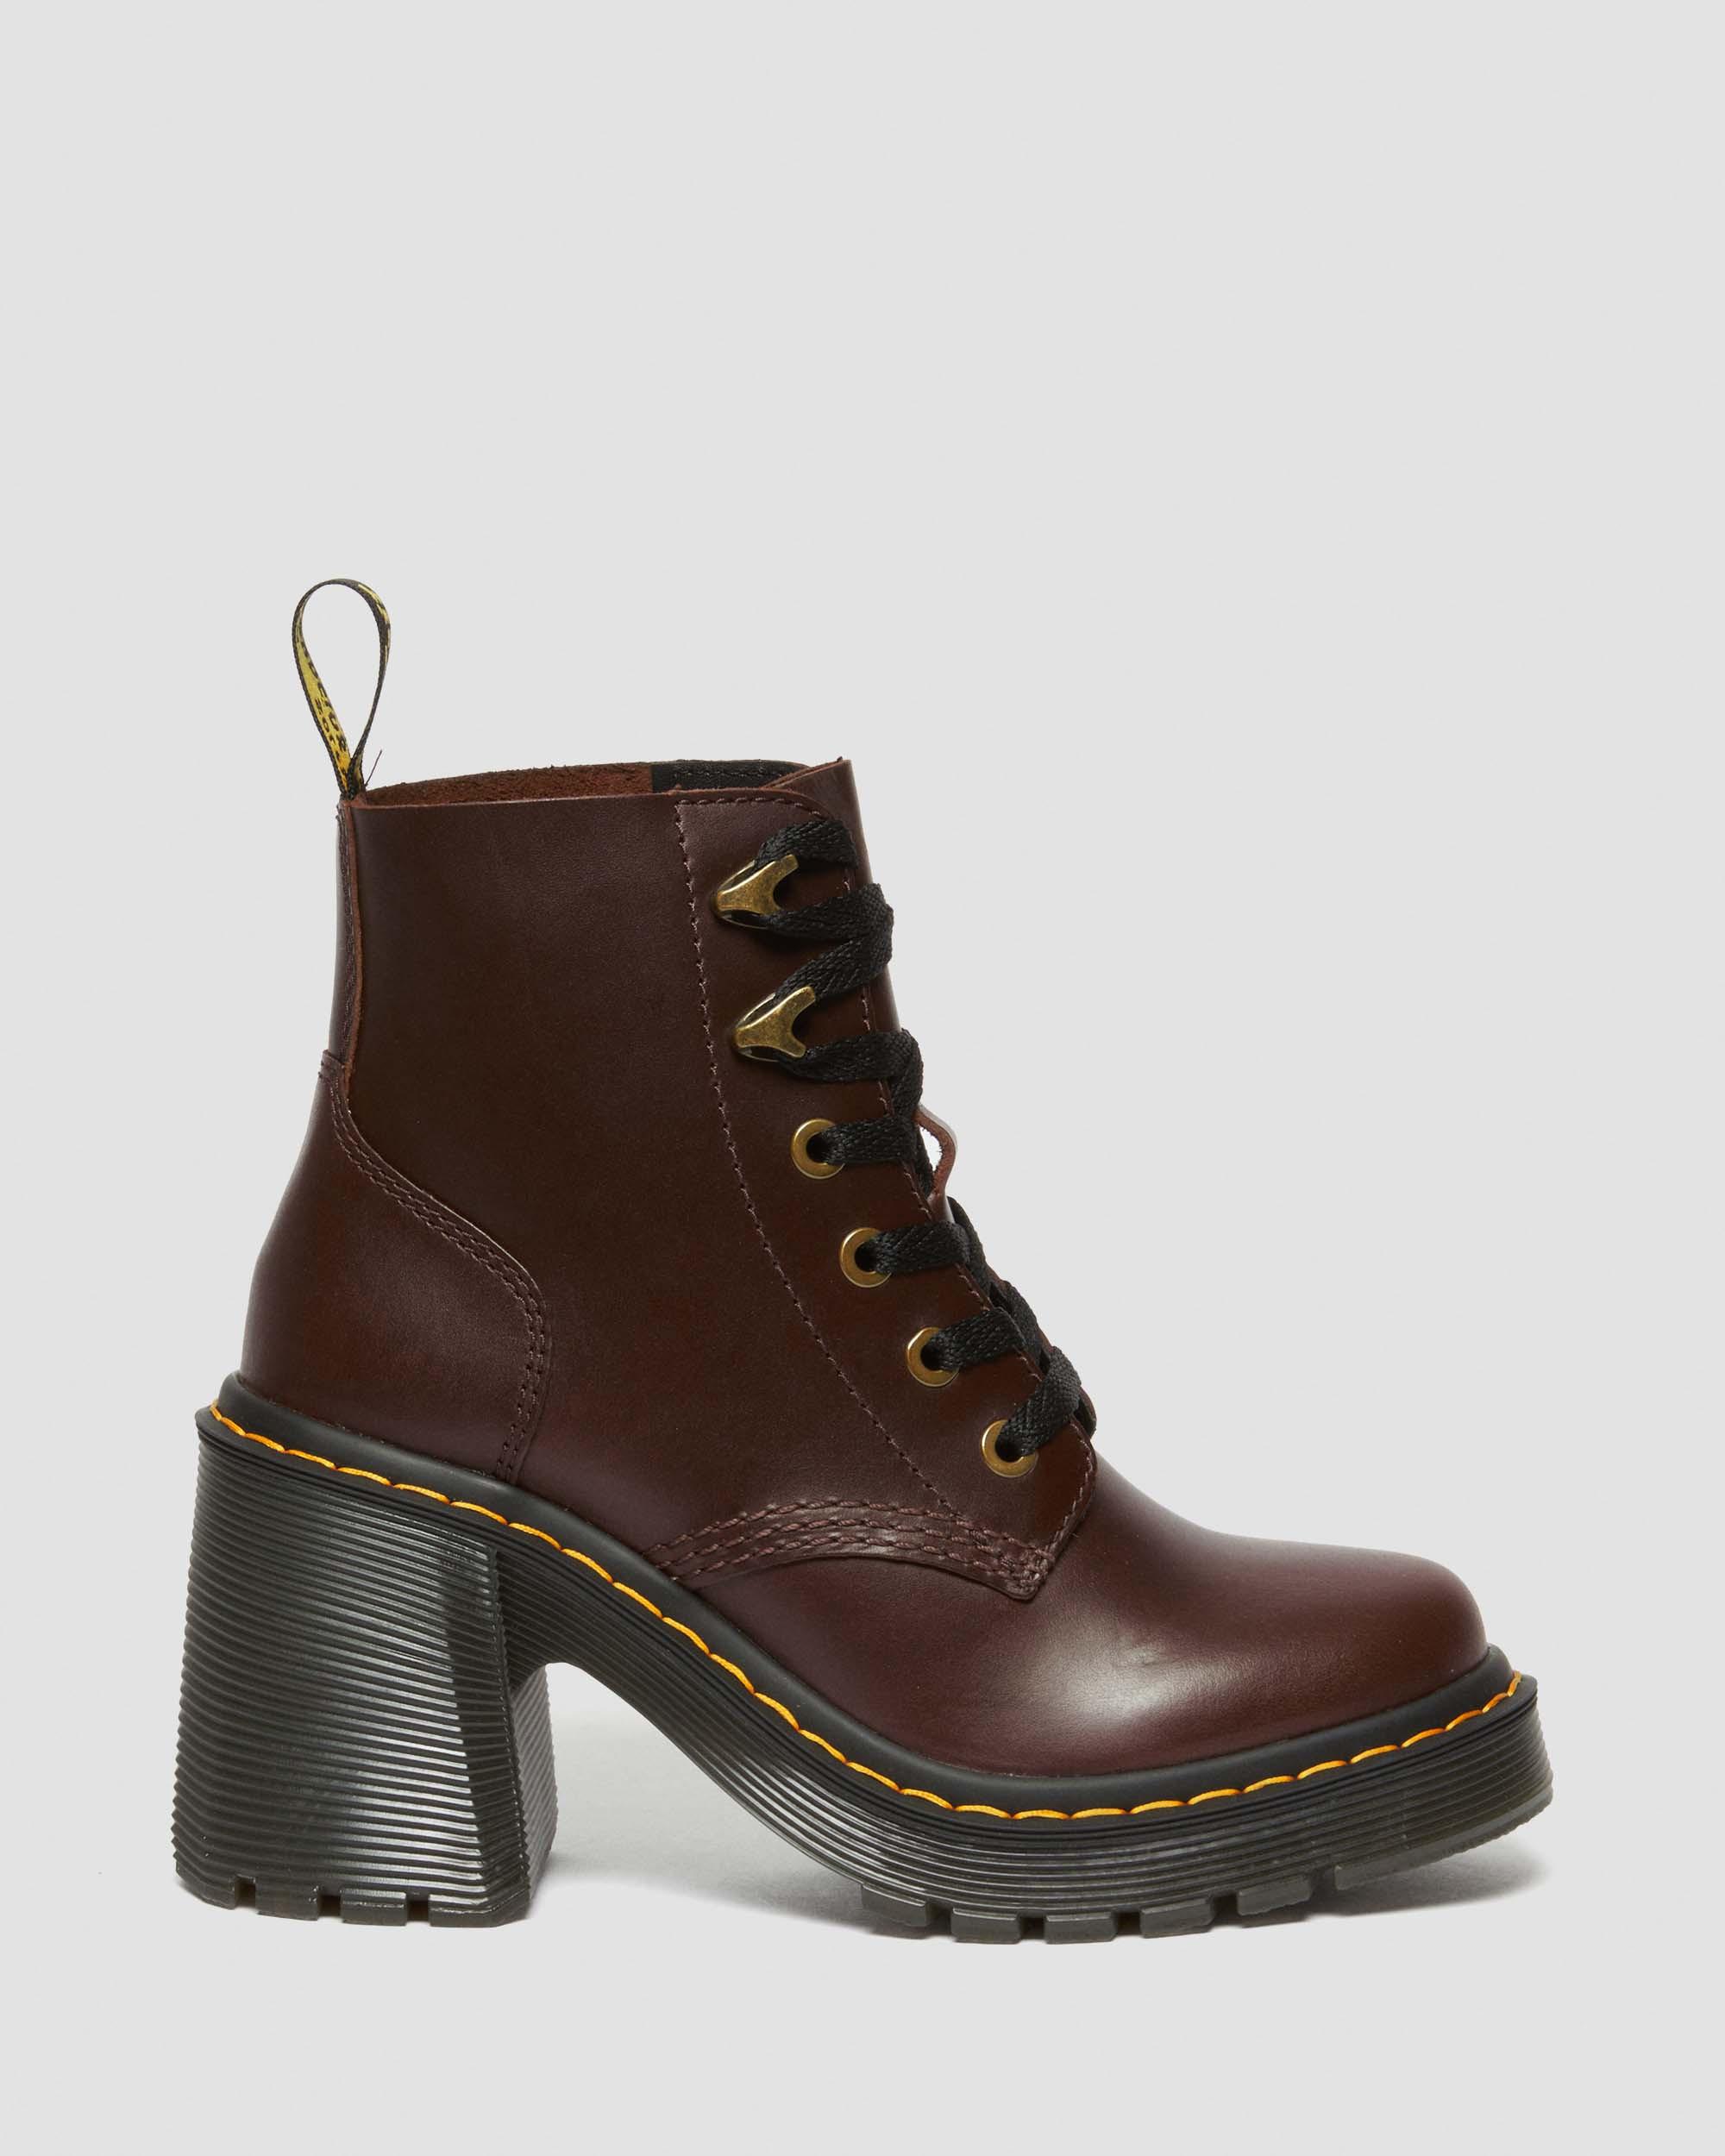 Jesy Leather Flared Heel Boots in Dark Brown